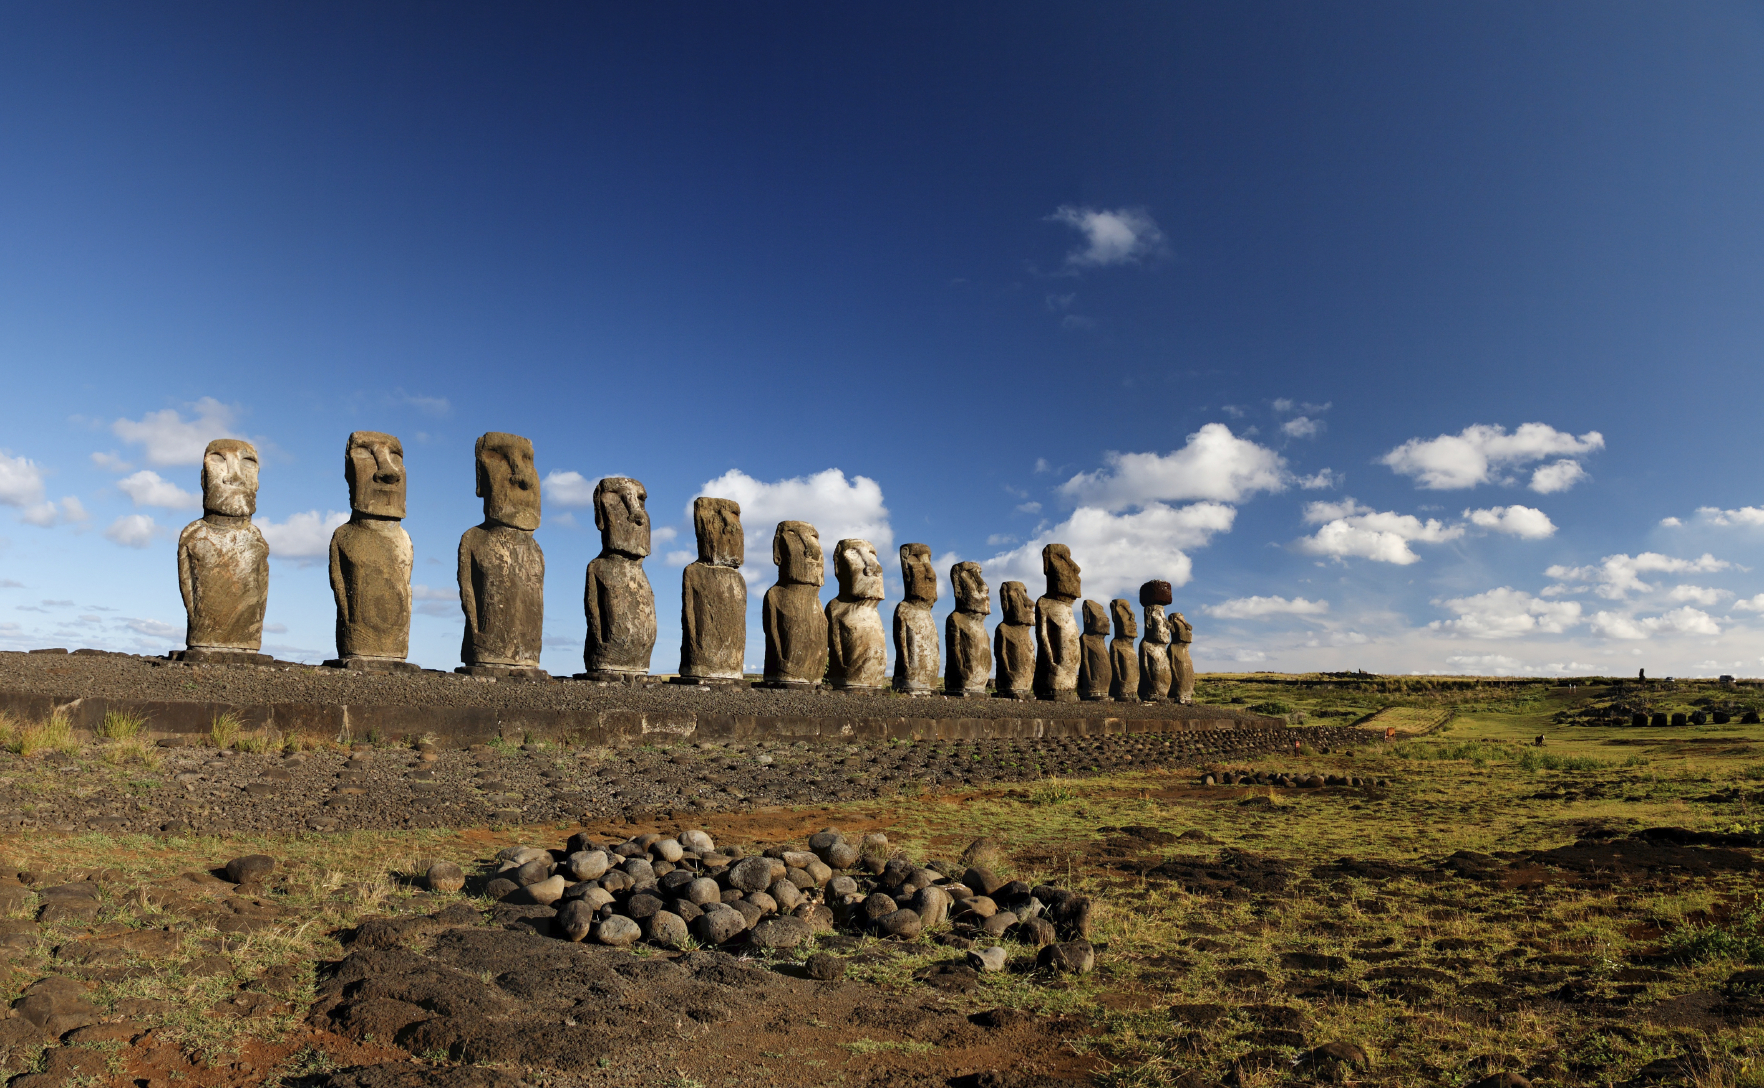 Moai monolithic human figures carved by the Rapa Nui people on Easter Island